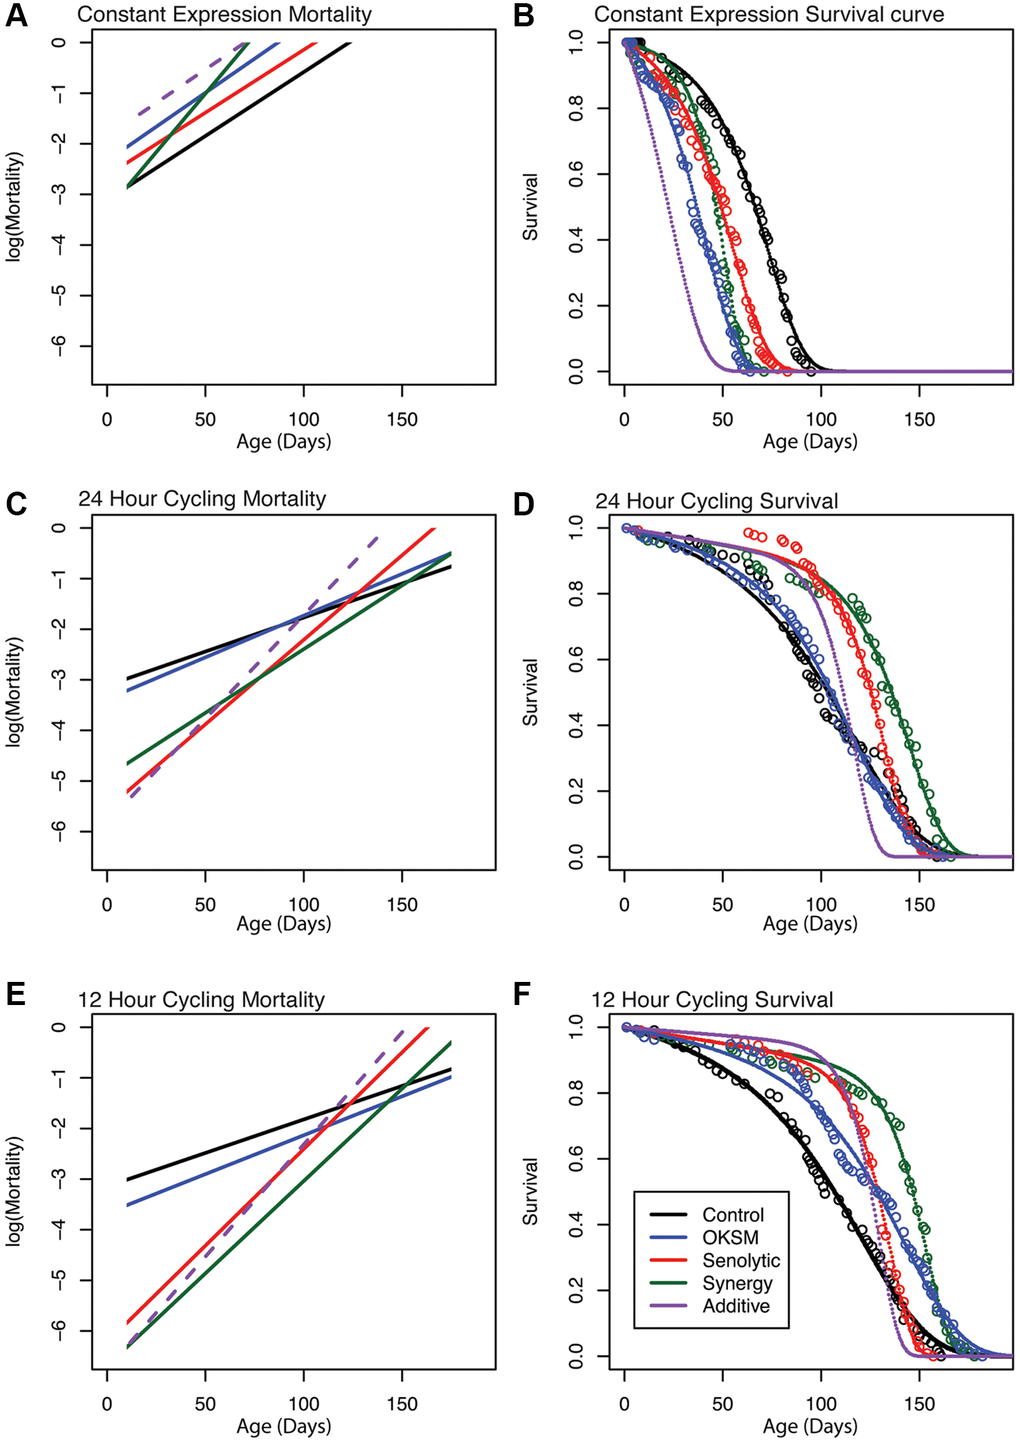 Gompertz–Makeham mortality and survival analysis demonstrates decreased early mortality with compensating increased aging rate in Sen and OKSM interventions. Survival data for each intervention are shown together with the best-fit survival curve on the right and the corresponding mortality trajectories are shown on the left. Initial log(Mortality) parameter (A) can be read as the intersection between mortality curve and y-axis at age zero. The slope of the mortality curve is proportional to 1/MRDT. The dashed purple line illustrates hypothetical mortality trajectory assuming additivity of effects elicited by OKSM and Sen. (A, B) Mortality trajectories and survival curve for cohorts with continuous induction of OKSM, Sen or OKSM+Sen and controls. (C, D) Mortality trajectories and survival curve for cohorts with induction of OKSM, Sen or OKSM+Sen for 24 h every three days and matched controls. (E, F) Mortality trajectories and survival curve for cohorts with induction of OKSM, Sen or OKSM+Sen for 12 h every three days and matched controls. Note that flies subject to continuous induction (Panels A and B) are permanently kept at 25°C and are therefore aging more rapidly than flies cultured at 18°C and induced for only for short periods. The slope of the mortality trajectory of controls in A is therefore approximately two times as larger, compared to that of controls in panels C and E. For exact MRDT and A parameter values and associated confidence intervals see: (Supplementary Table 2).